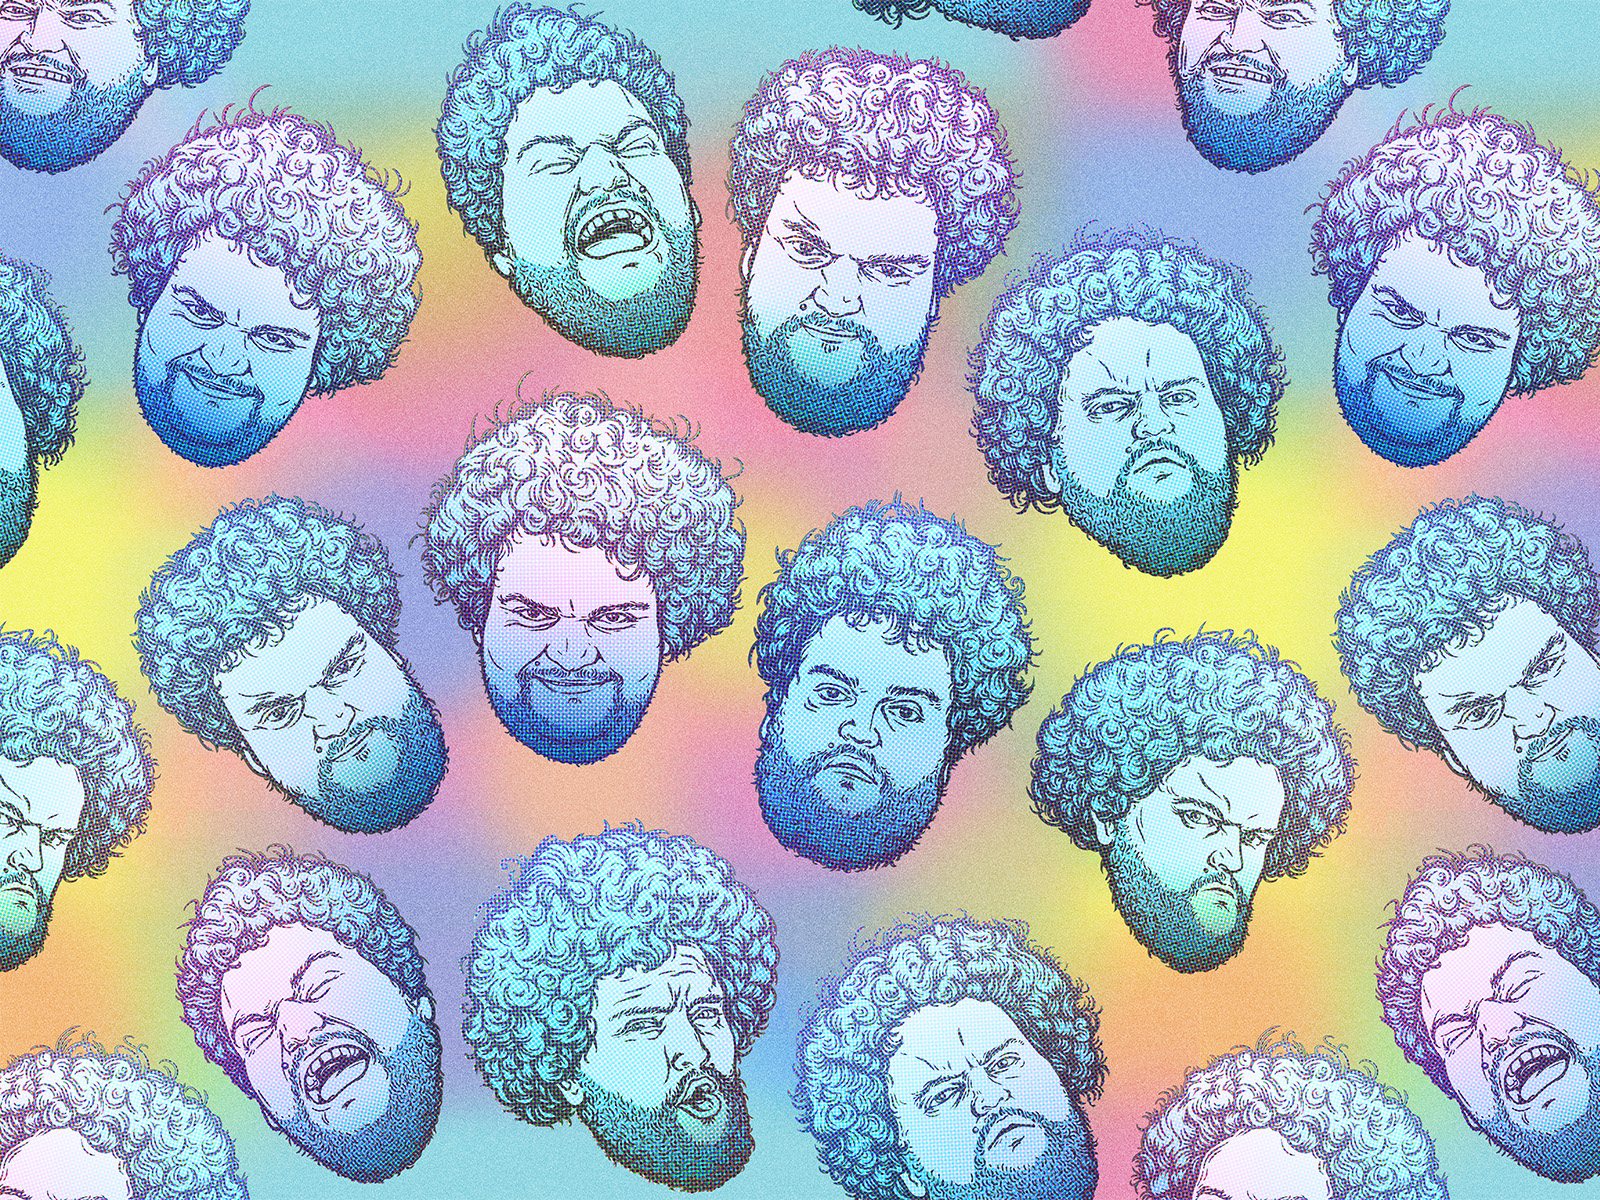 Willy Balls by MUTI on Dribbble